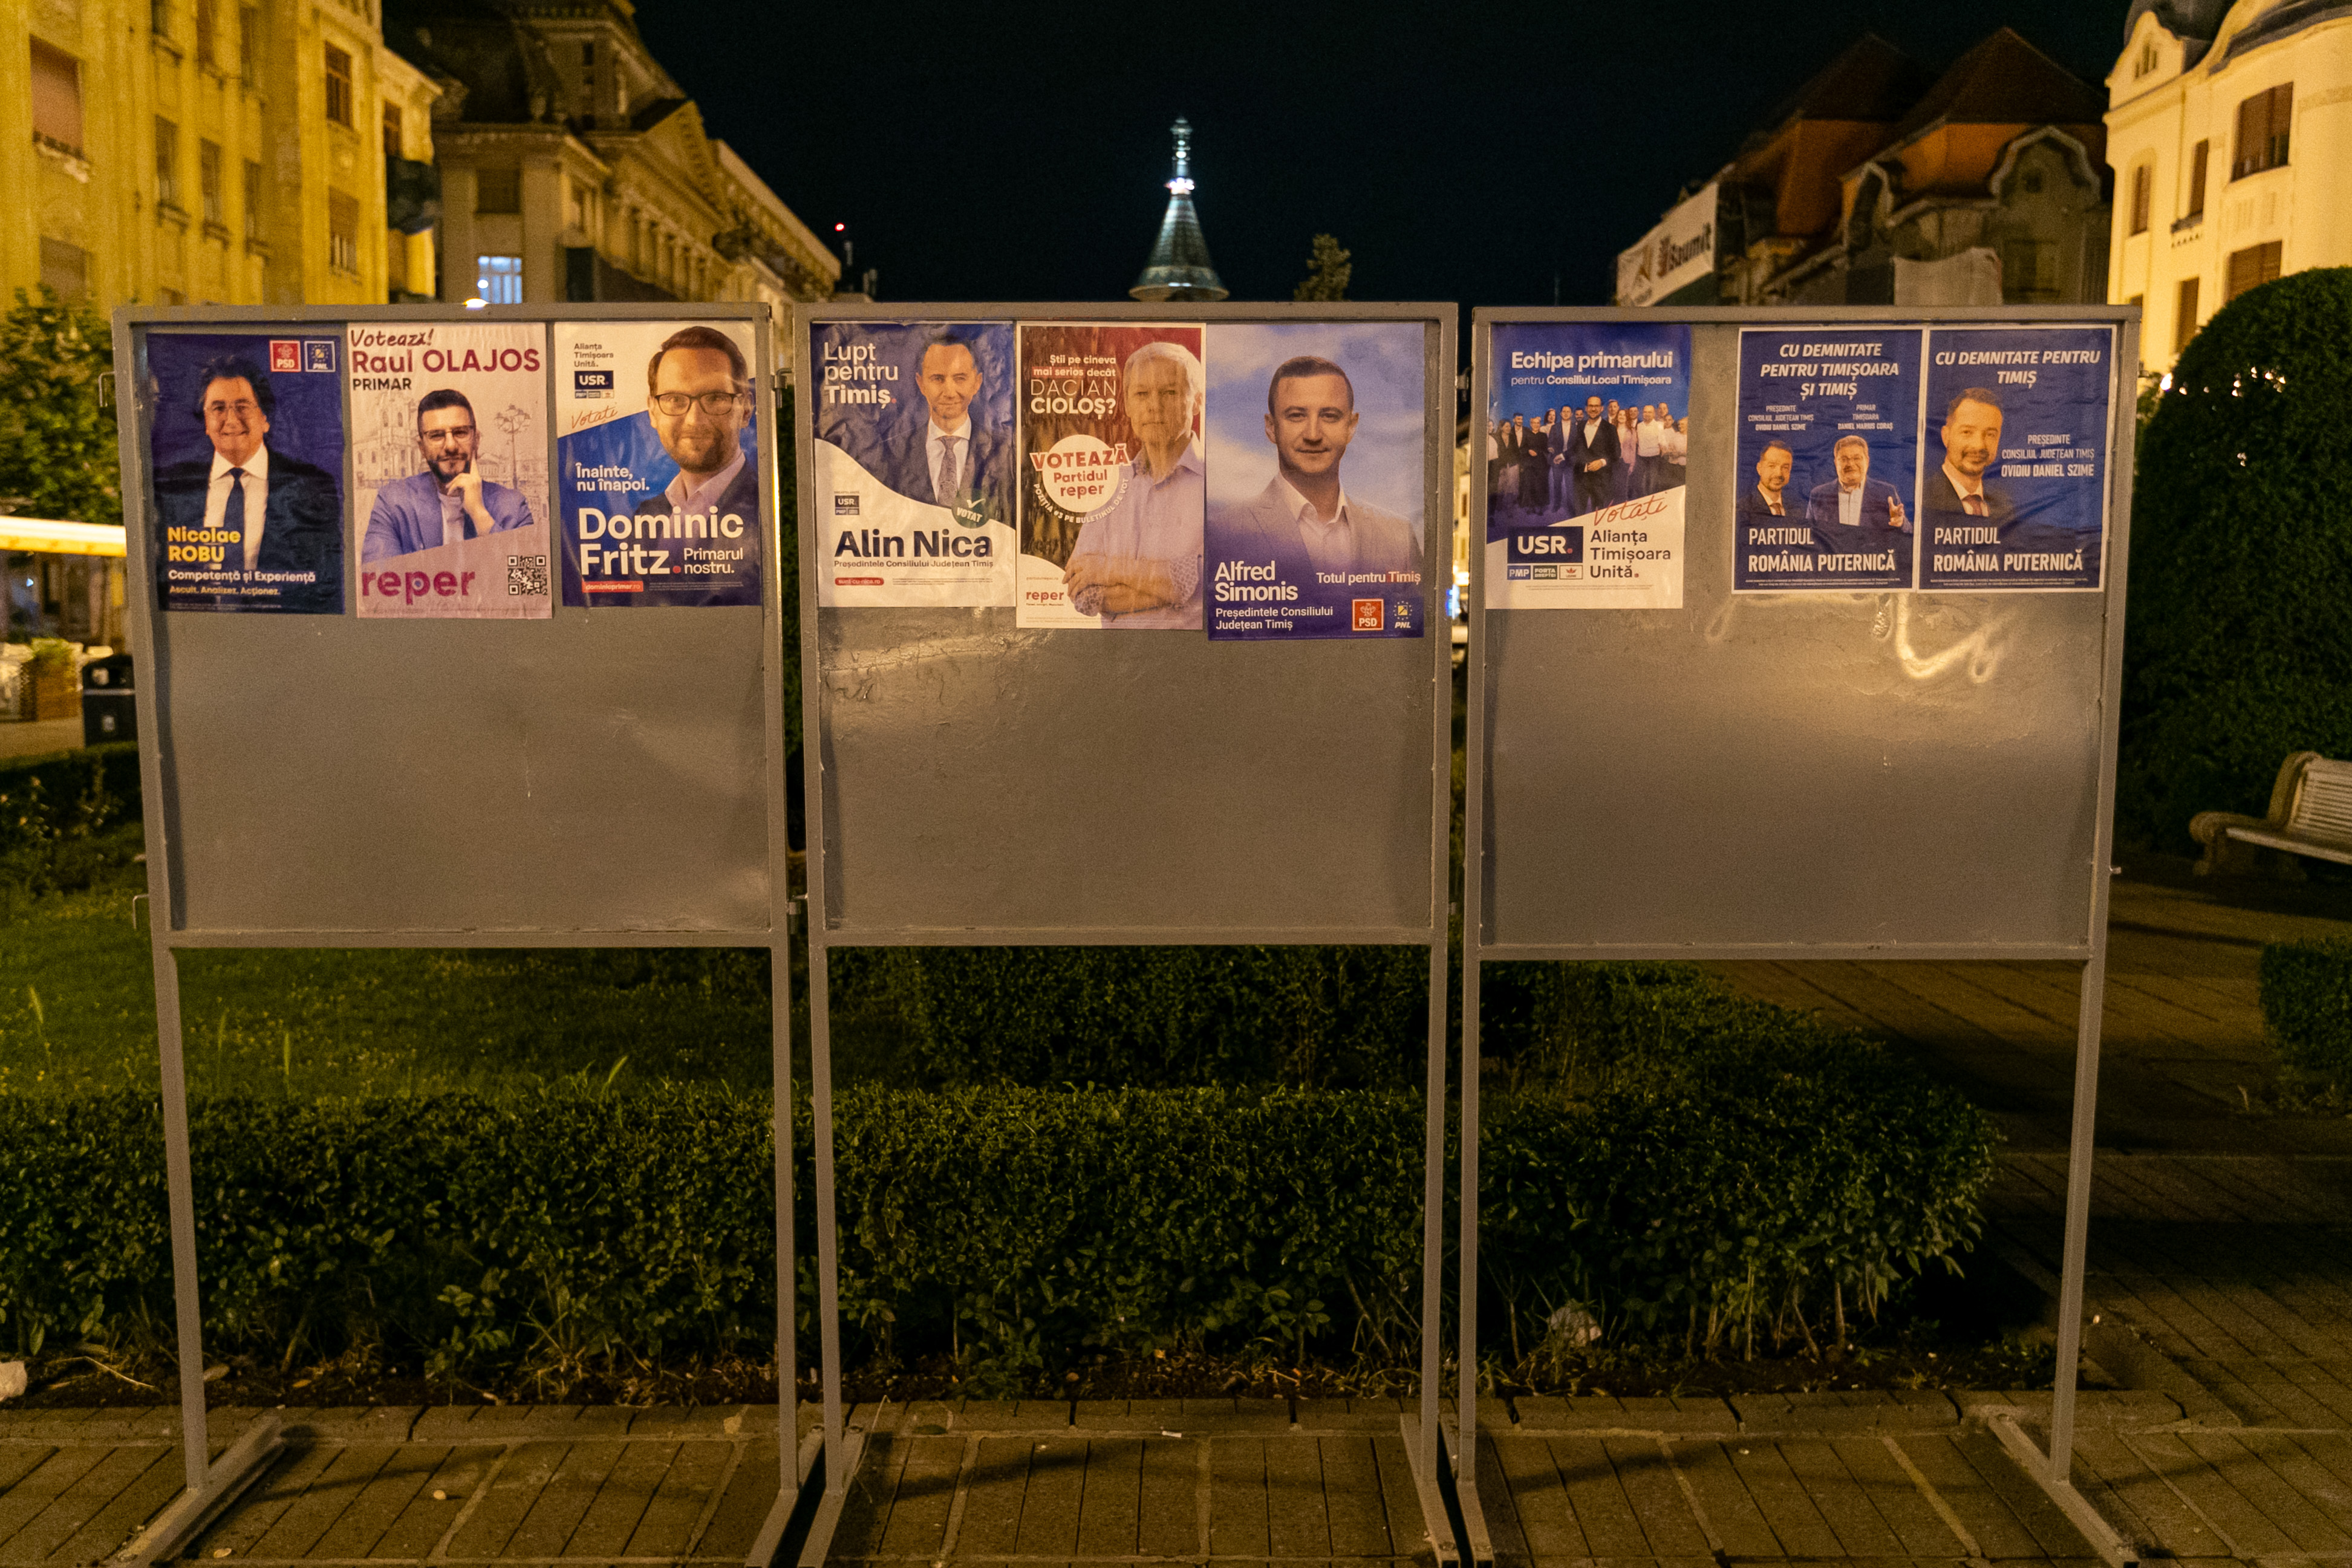 Electoral campaign for local and European Parliament elections kicks off in Romania